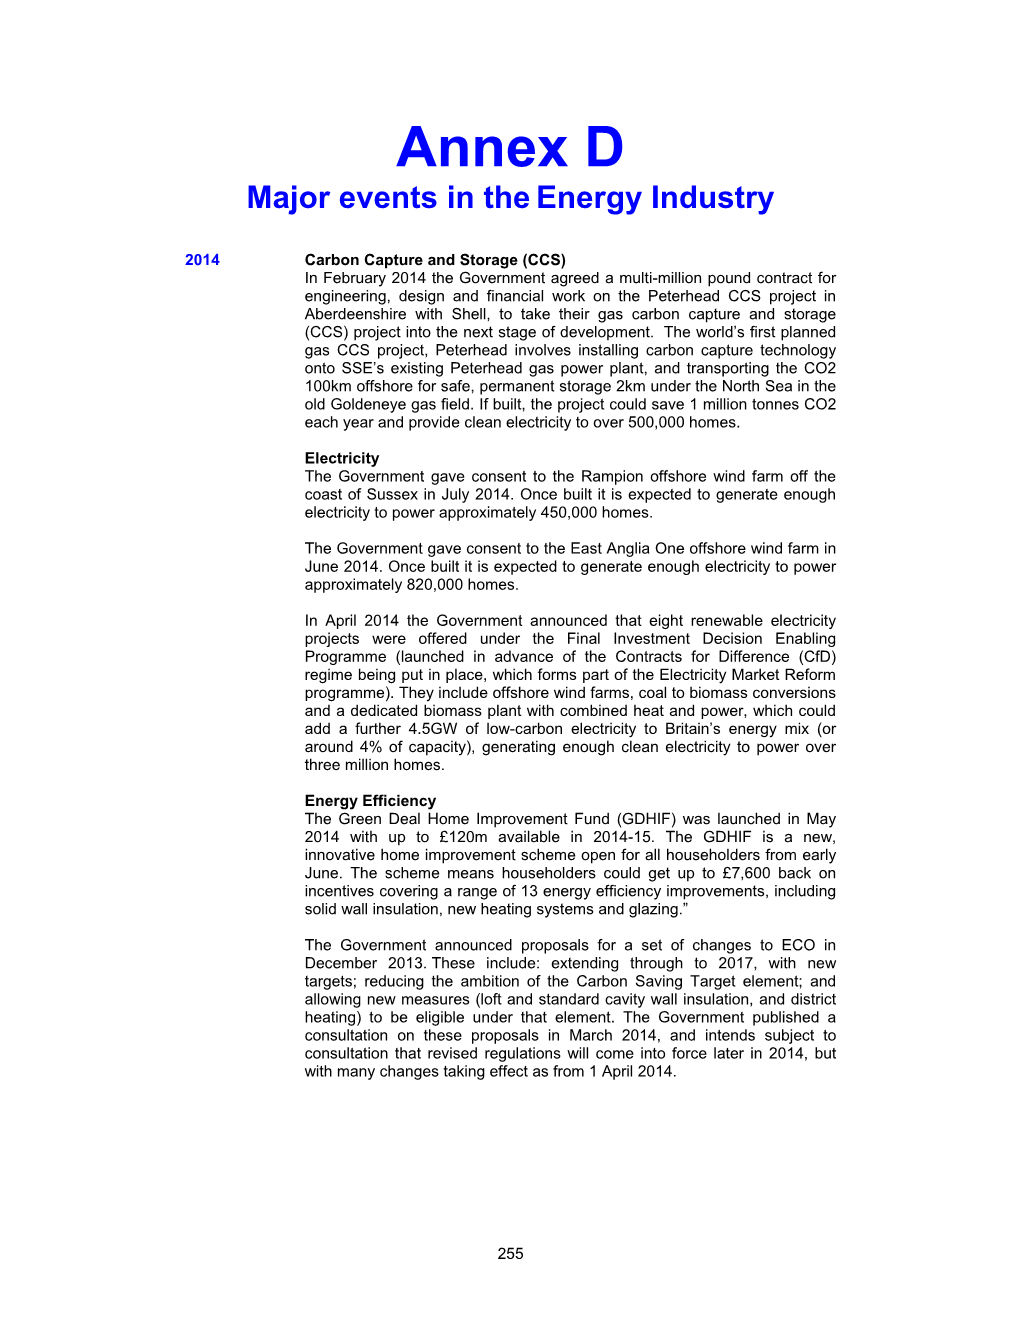 Annex D Major Events in the Energy Industry